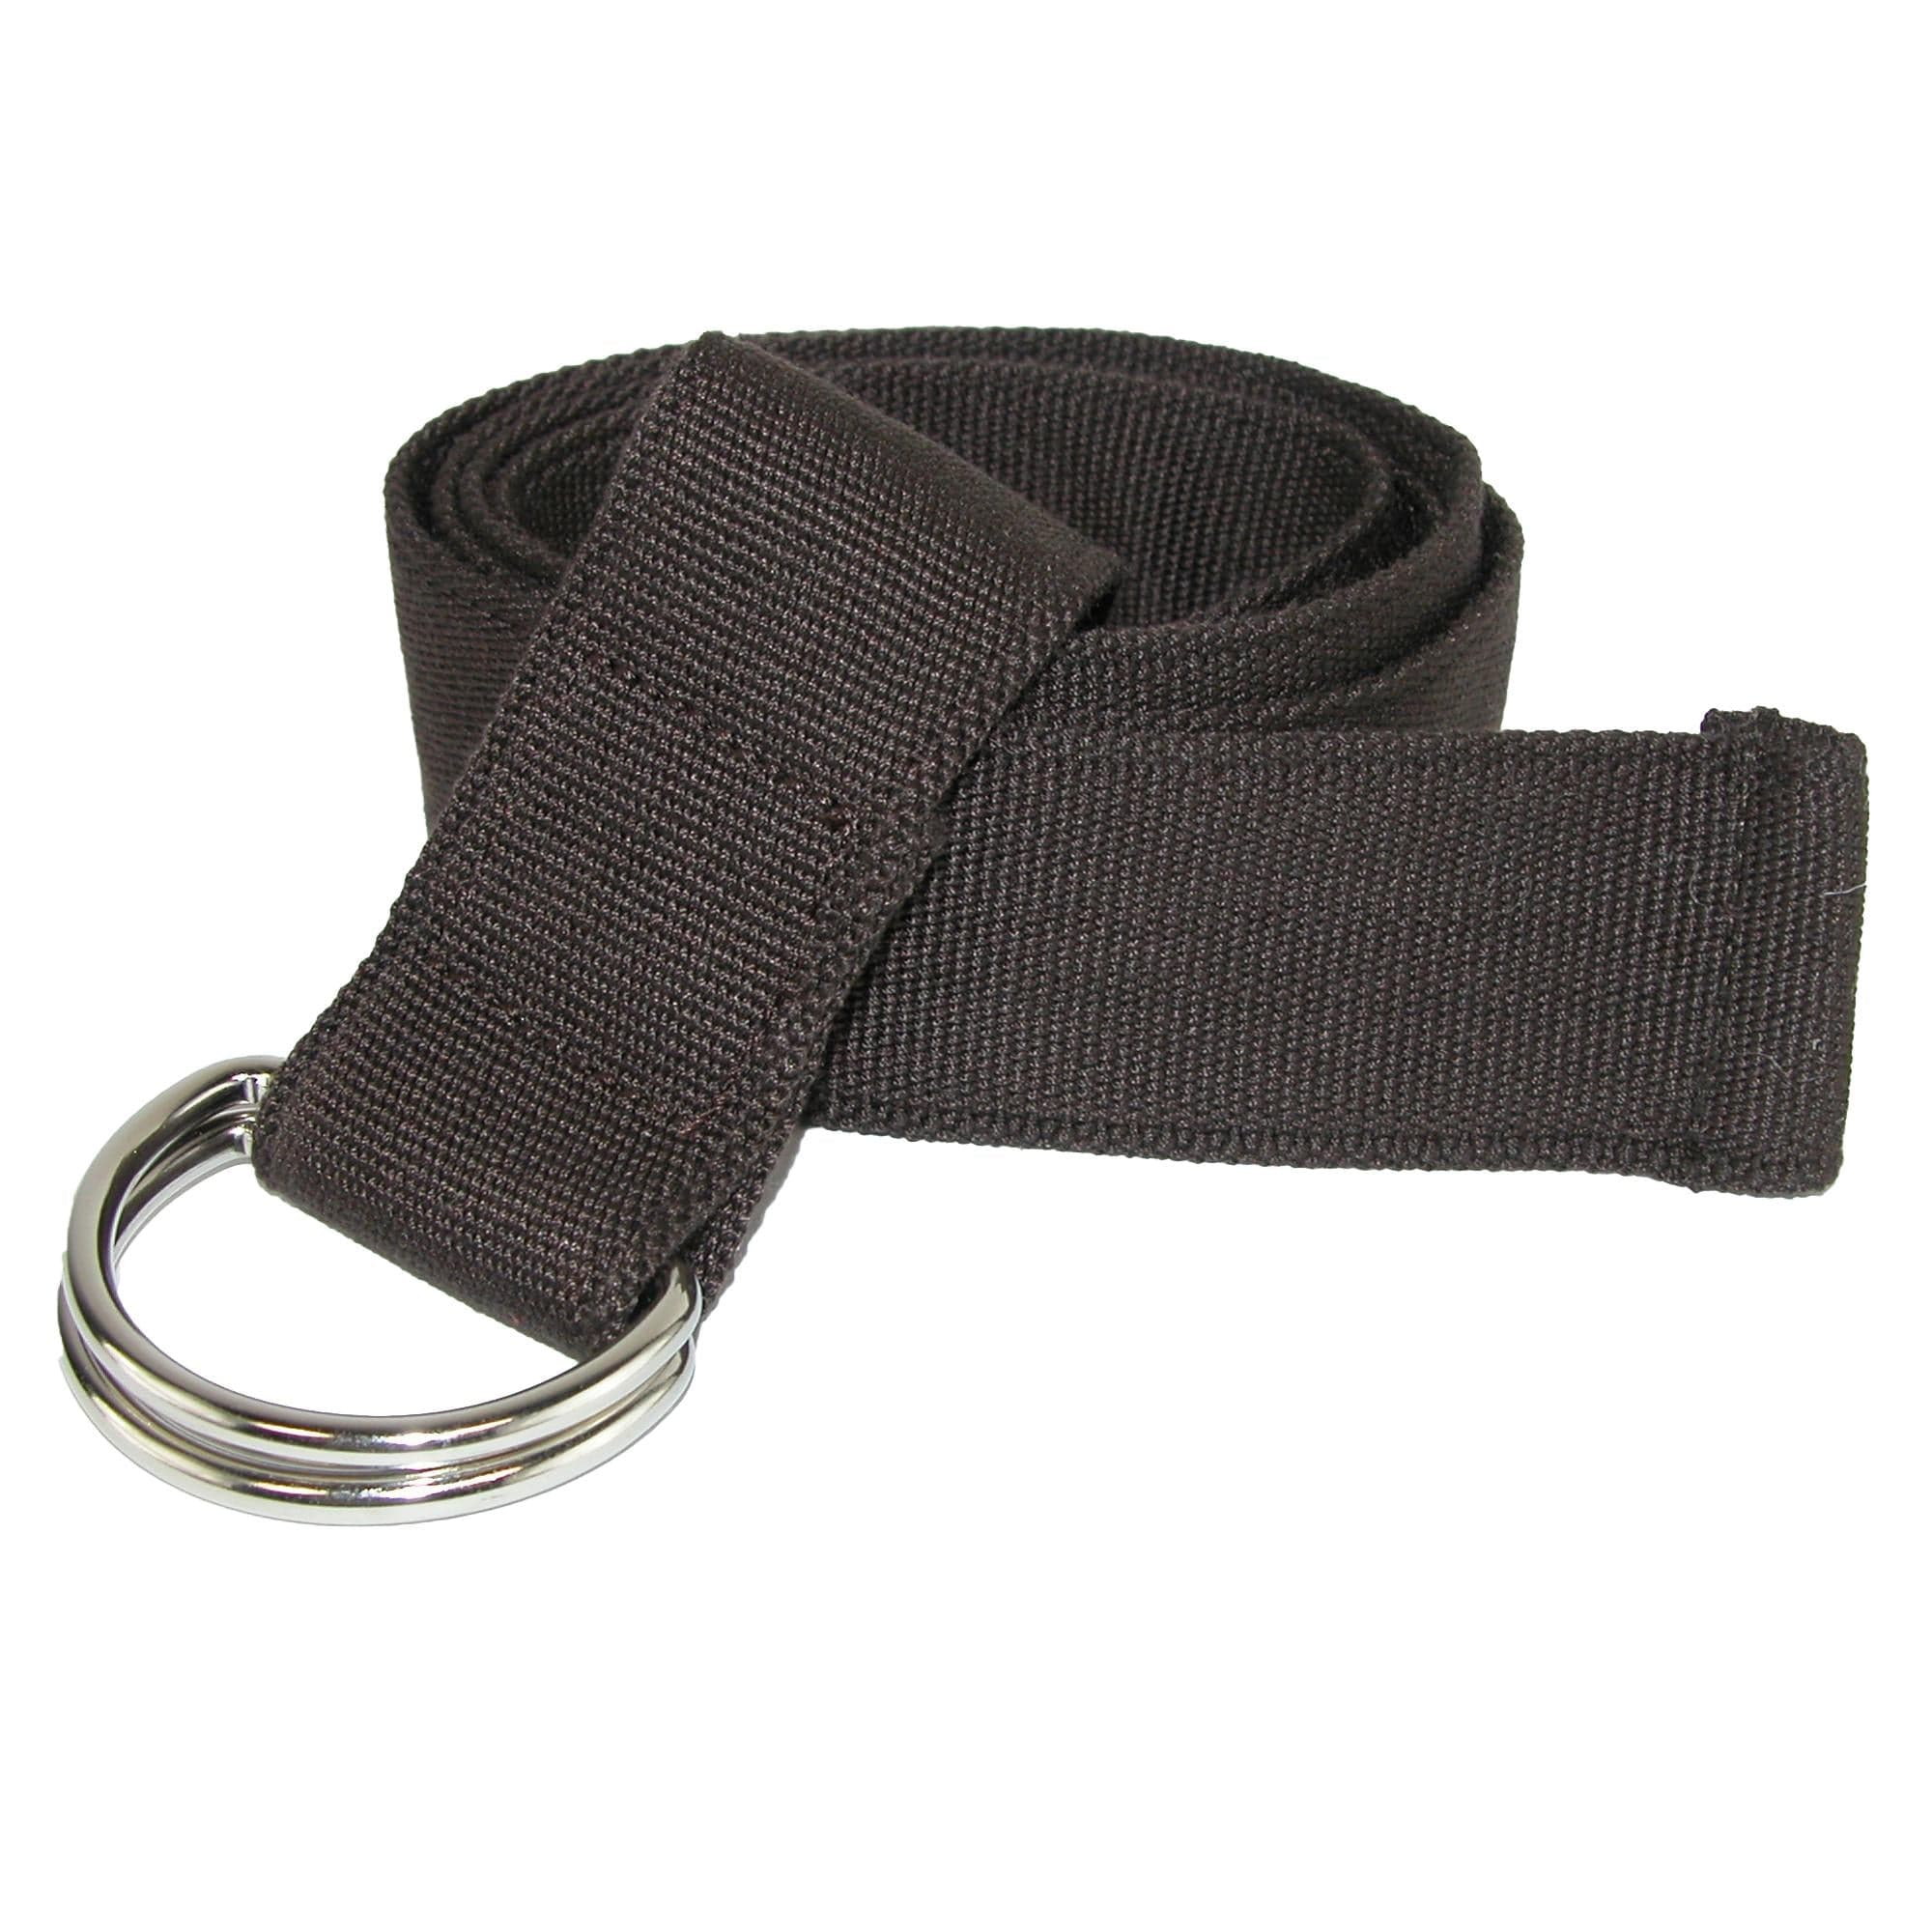 Canvas Web Belt with D Ring Buckle by CTM